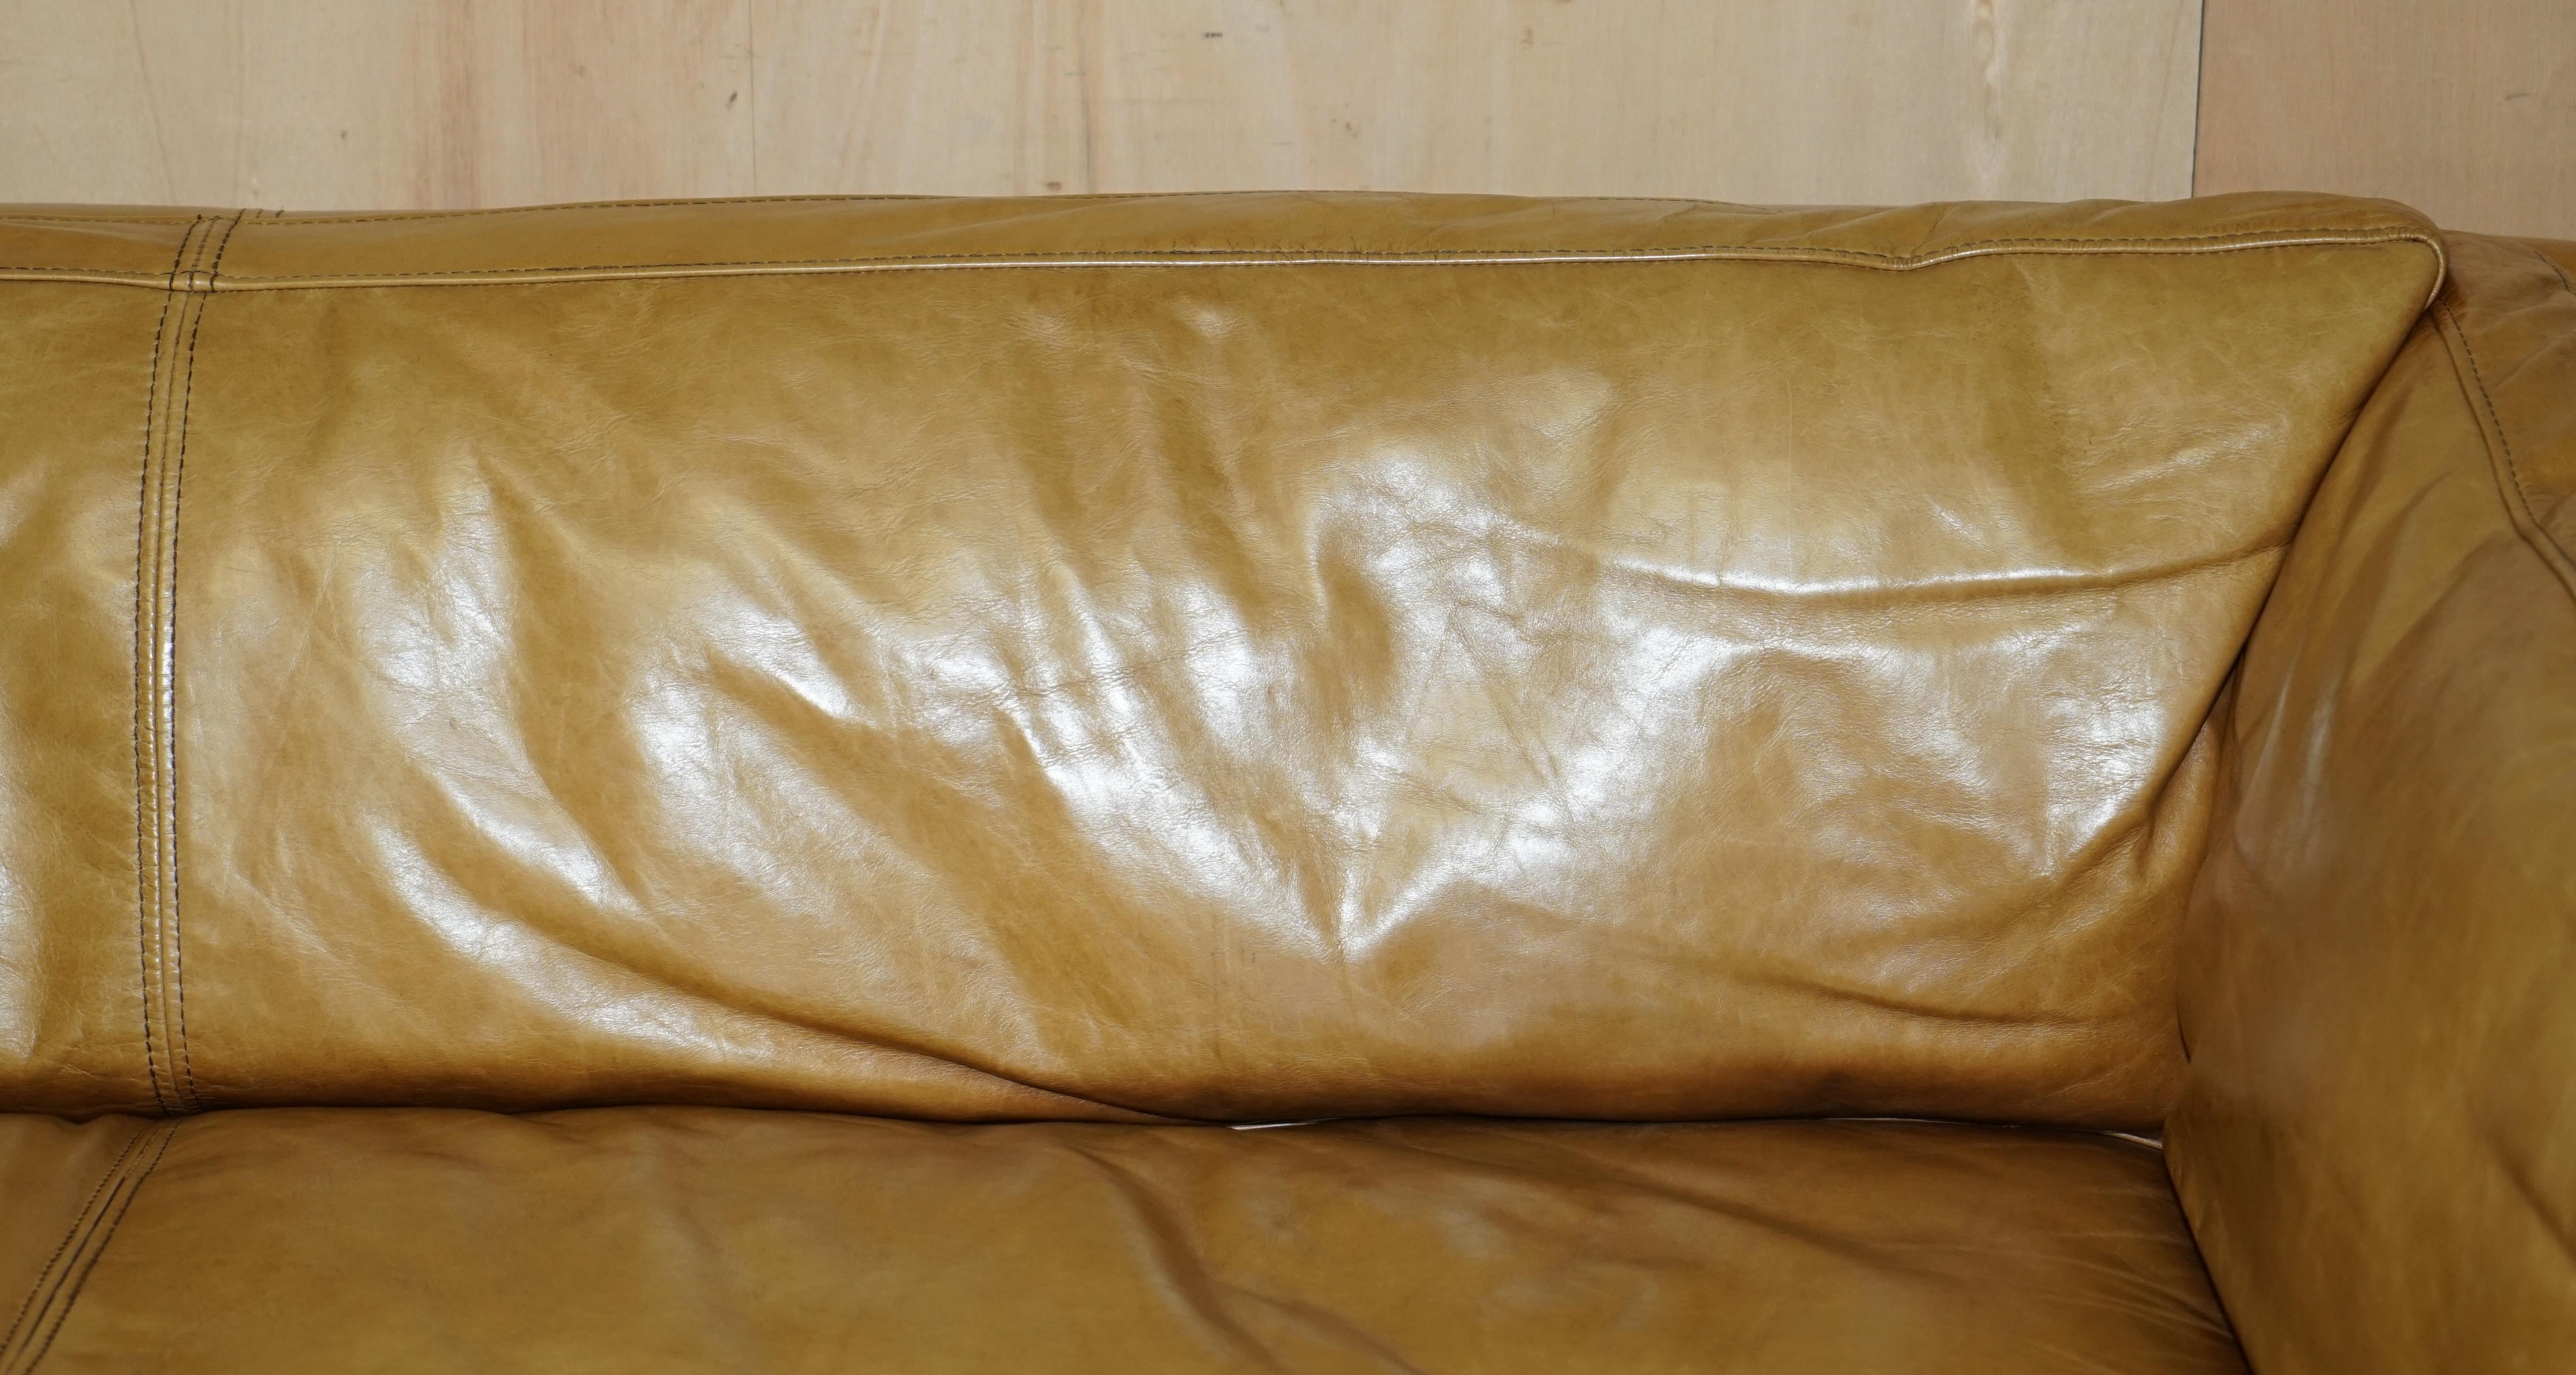 Leather STYLiSH SUPER COMFORTABLE LARGE HALO GROUCHO TAN BROWN LEATHER THREE SEAT SOFA For Sale